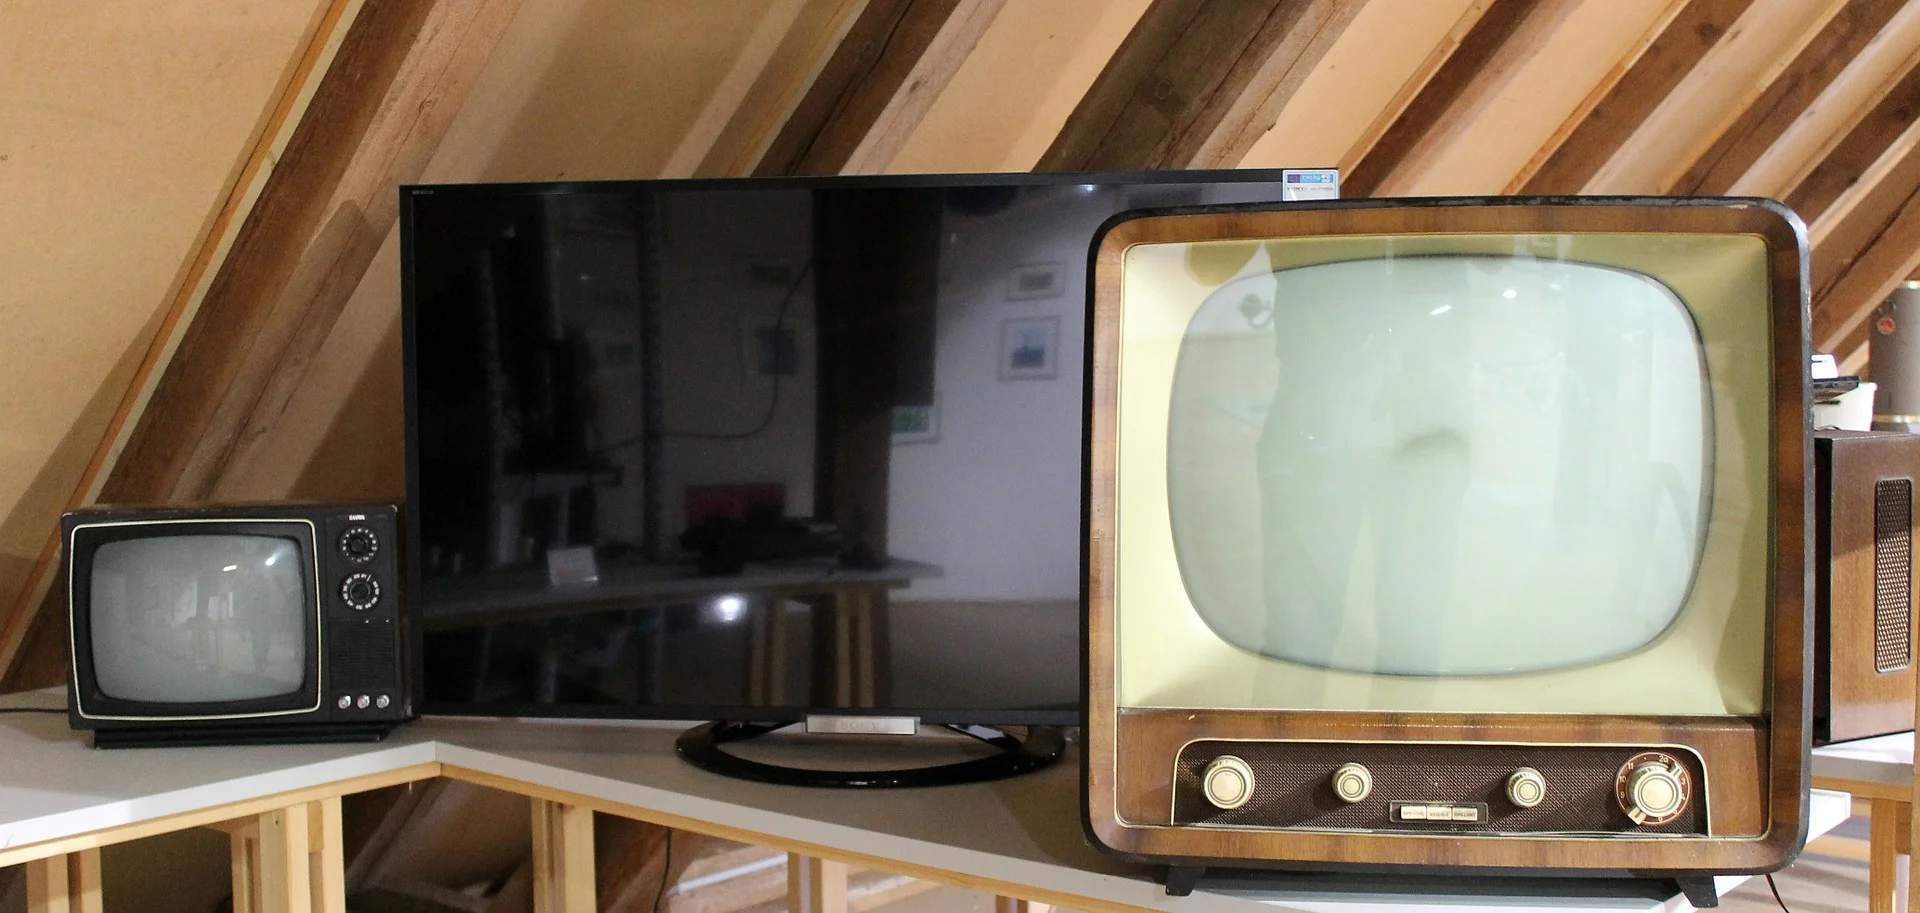 Images of Multiple TV's with different aspect ratios